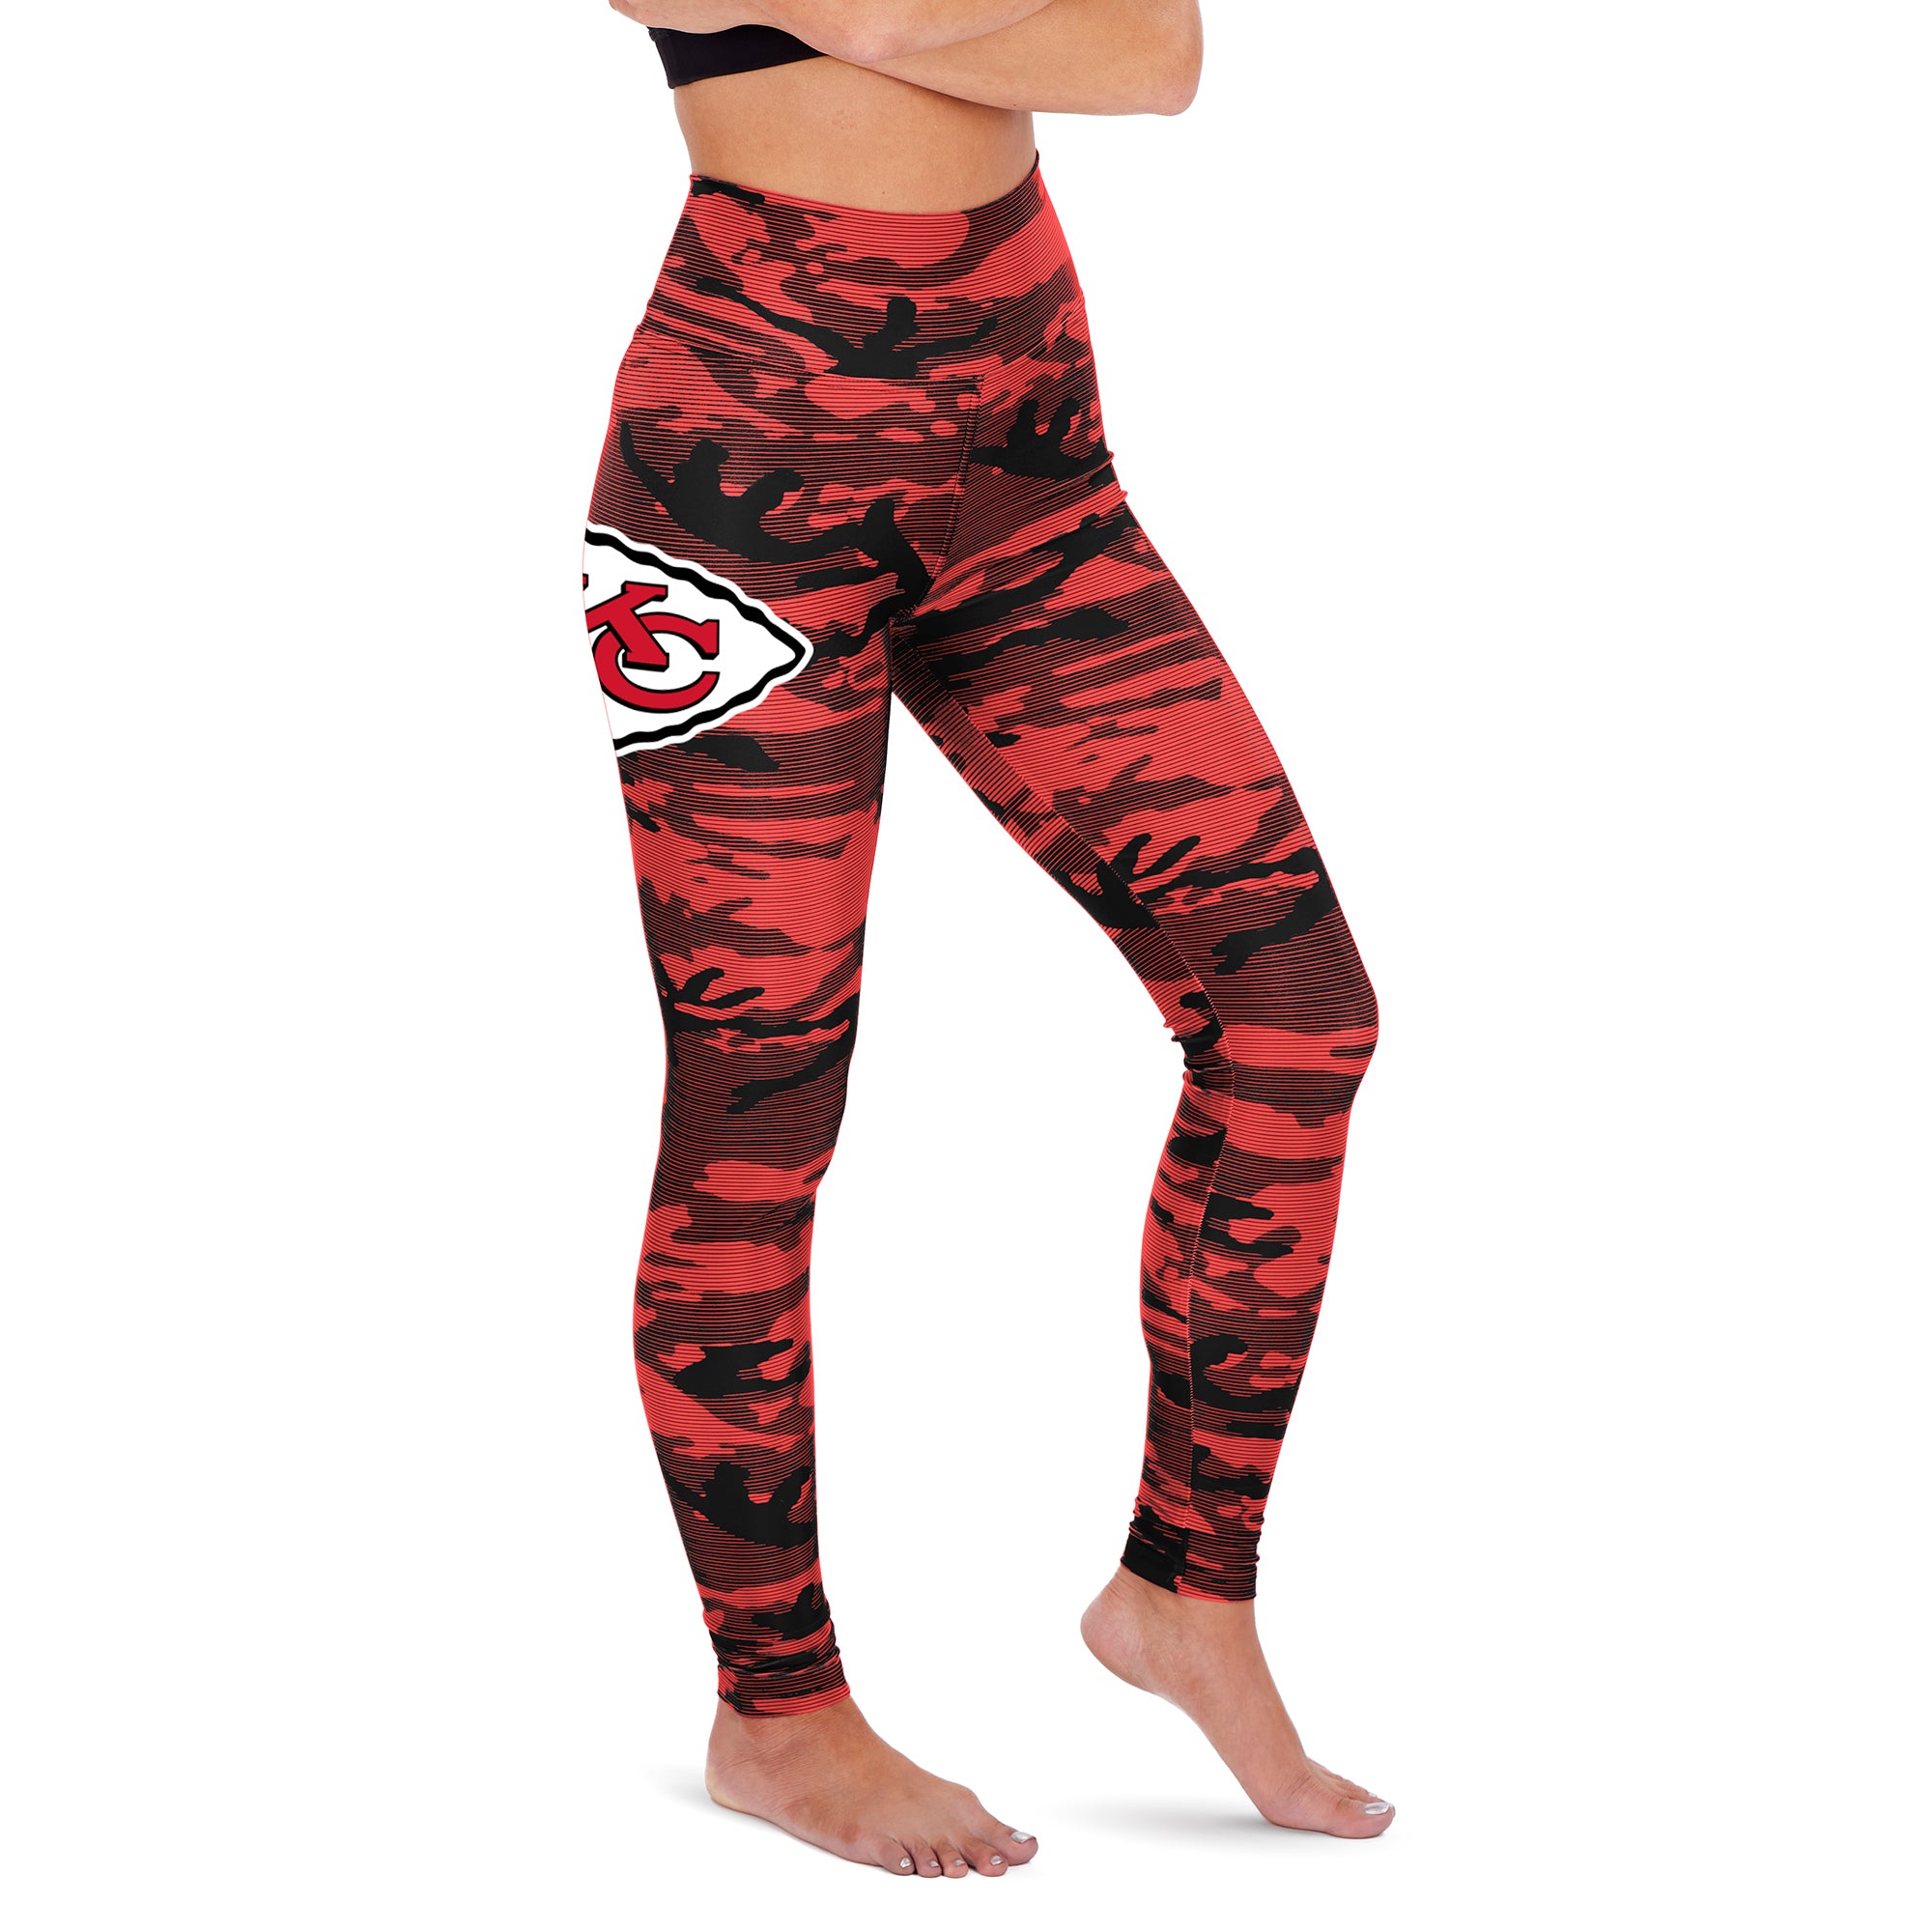 Best Deal for Zubaz NFL Women's Camo and Lines Legging in Team Colors